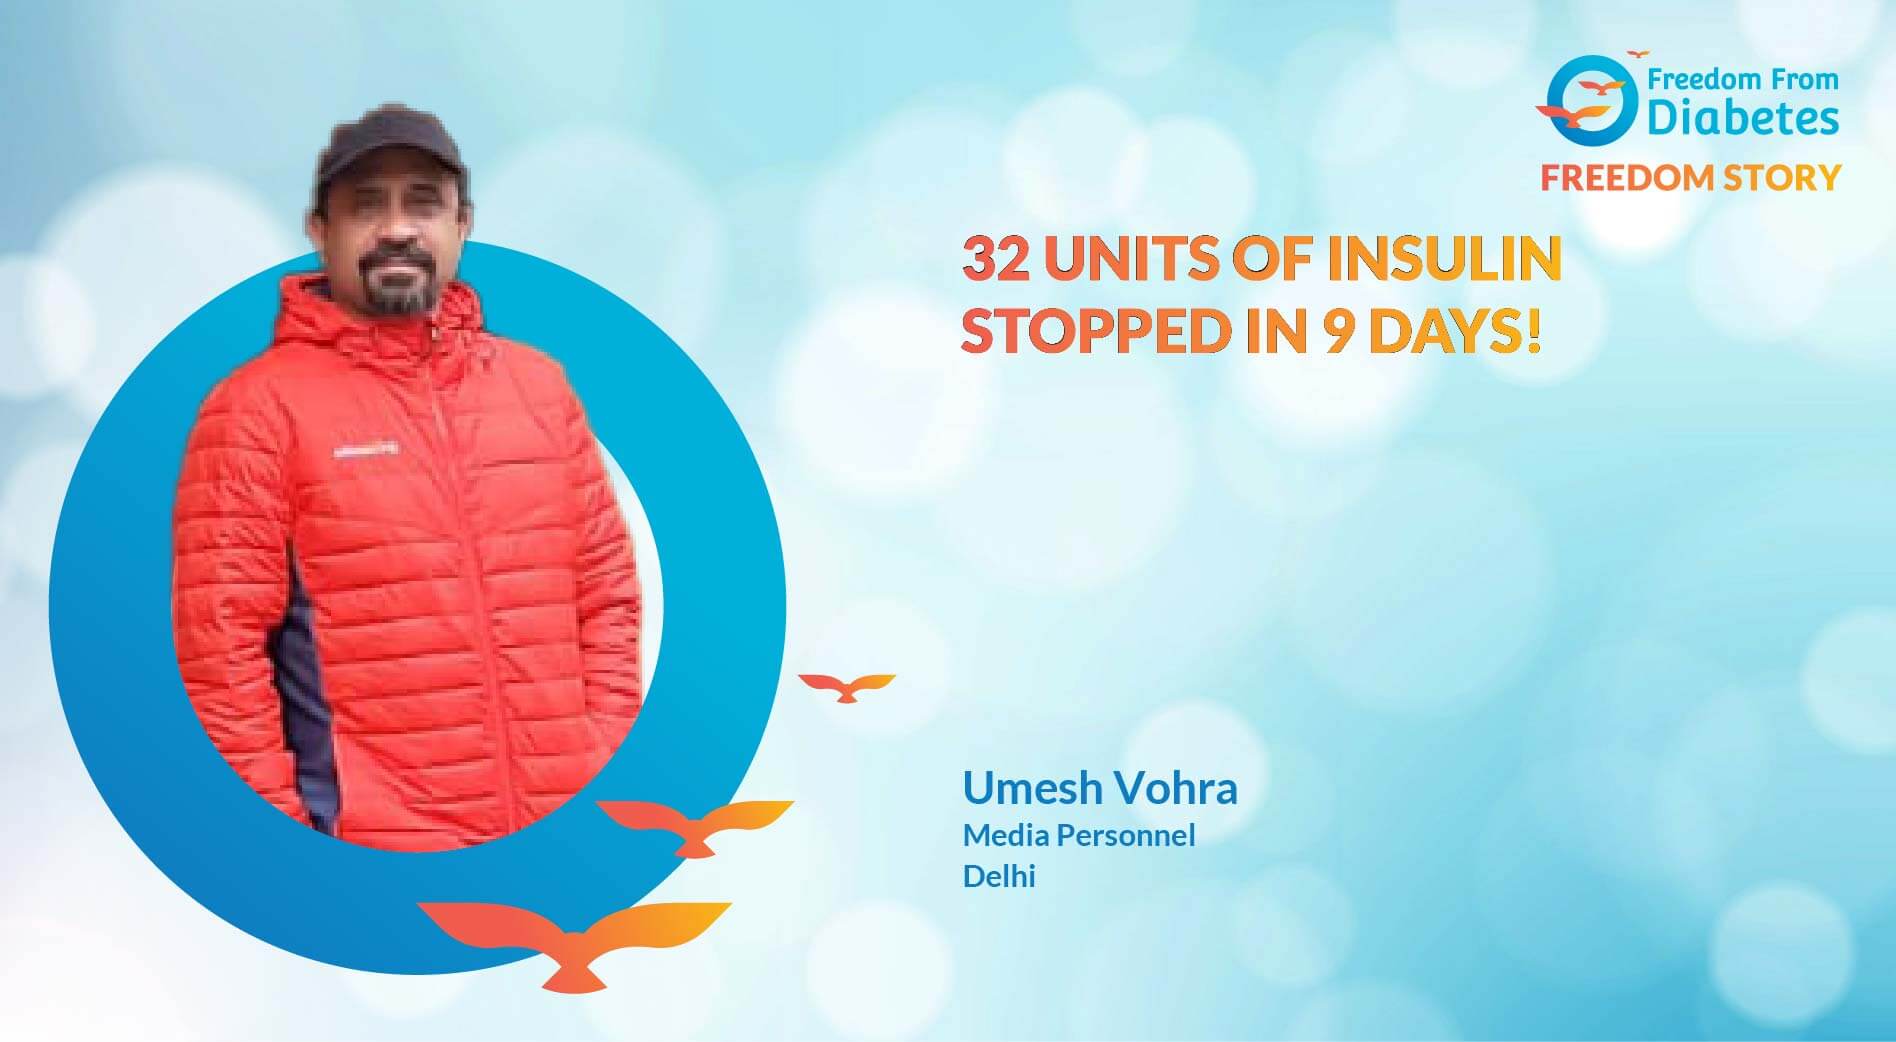 In just 9 days, 32 units of insulin were stopped!